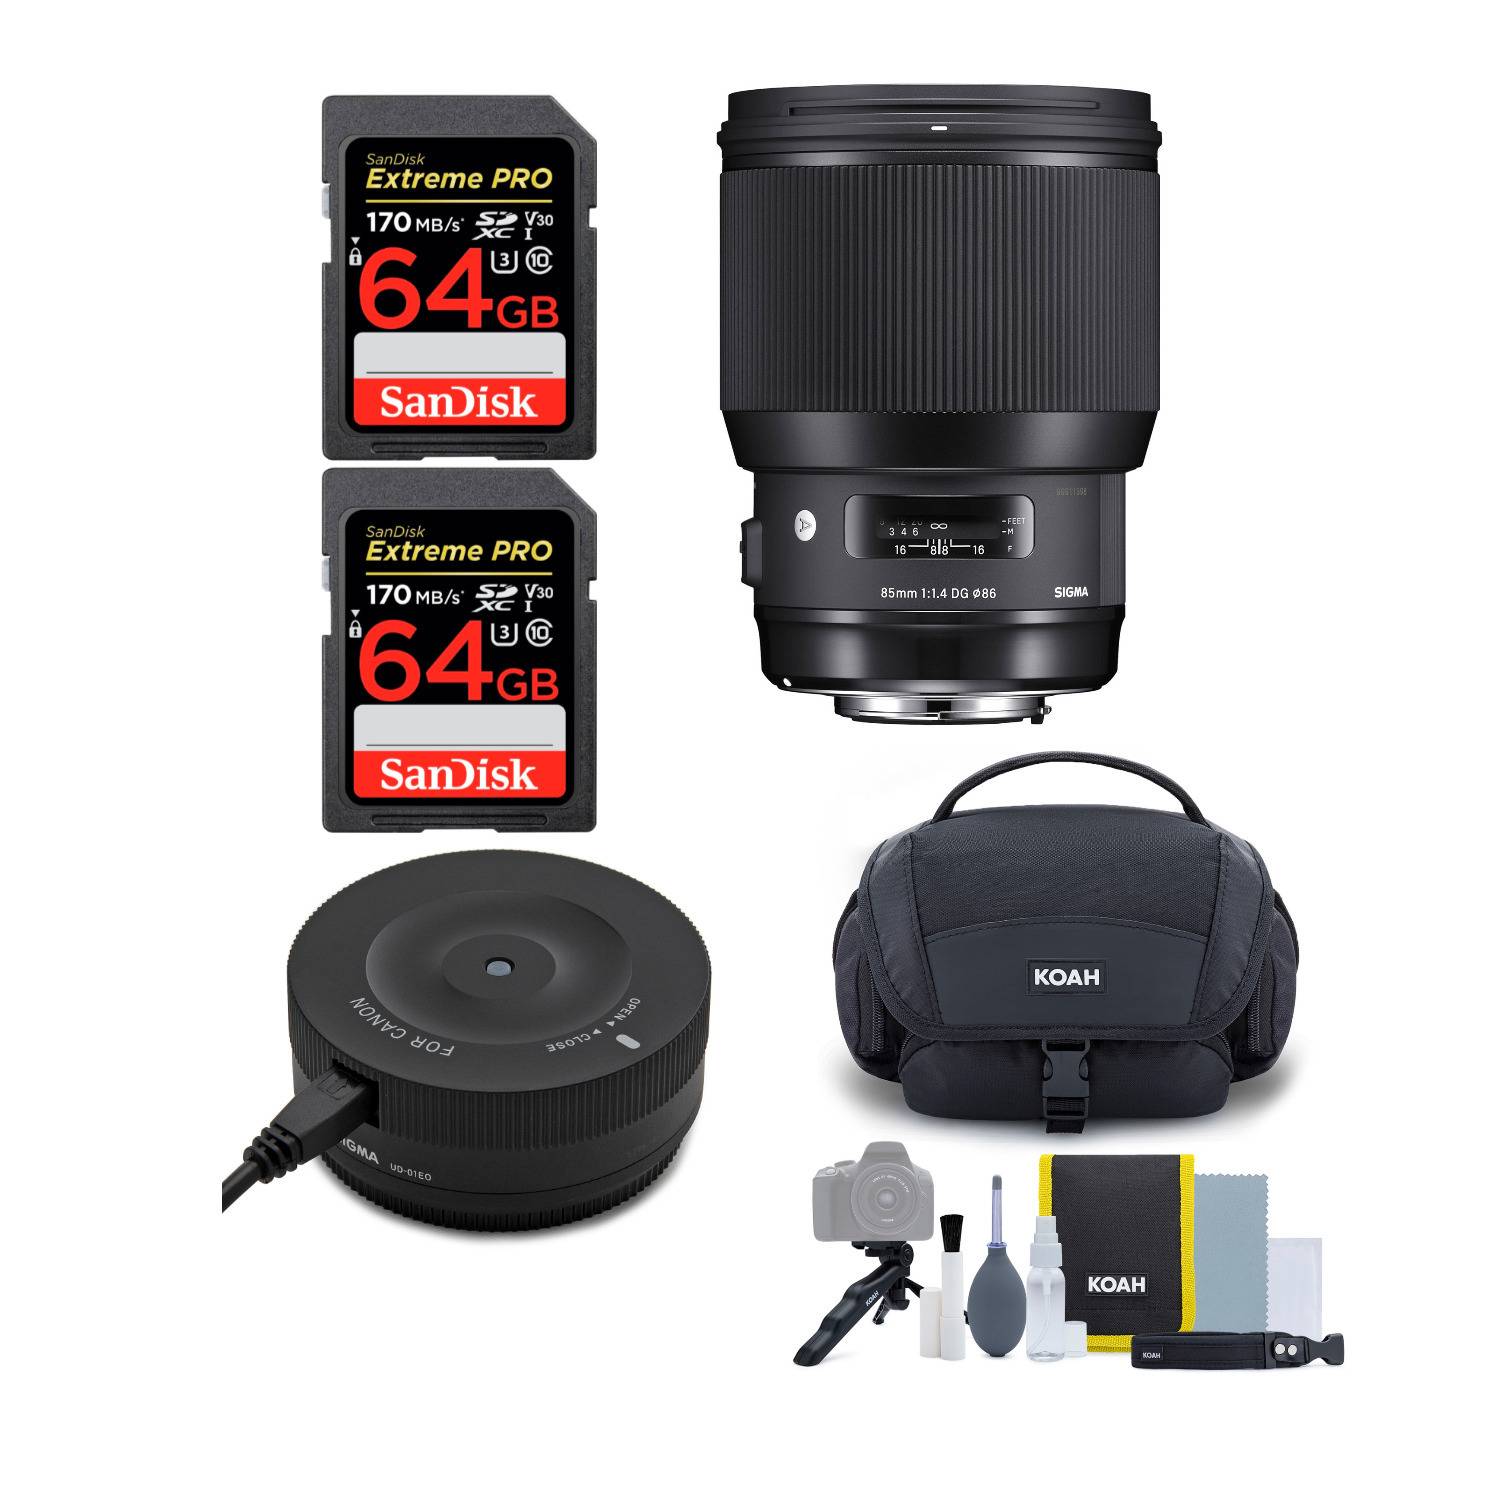 Sigma 85mm f/1.4 DG HSM Art Lens for Canon EF w/ USB Dock, and Accessory Bundle